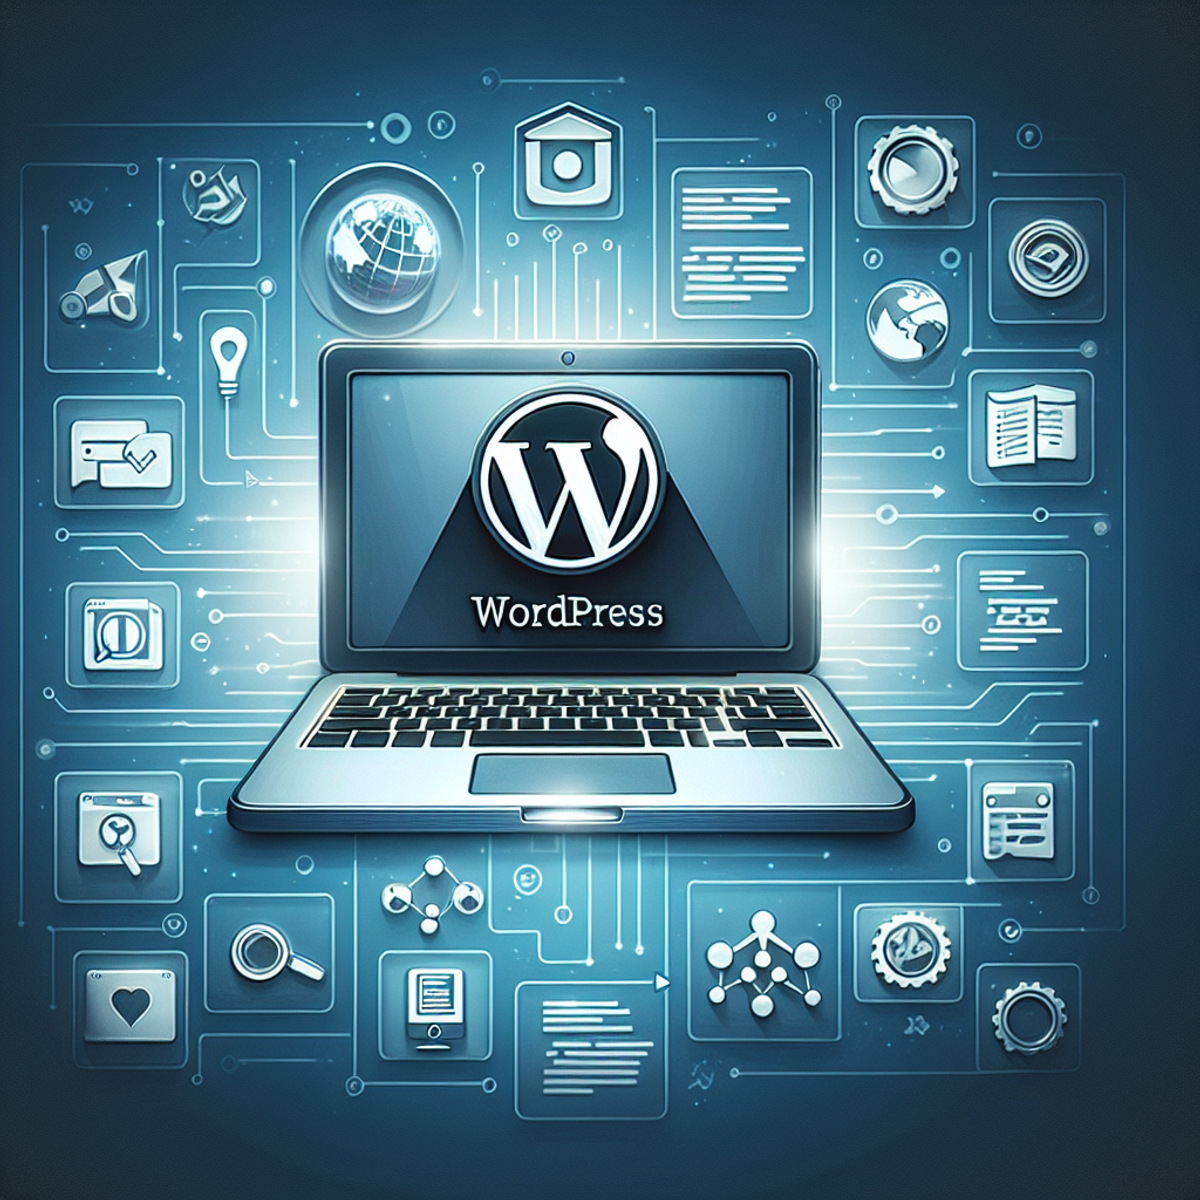 An open laptop with a simplified WordPress symbol on the screen, surrounded by digital icons representing website elements and tools.